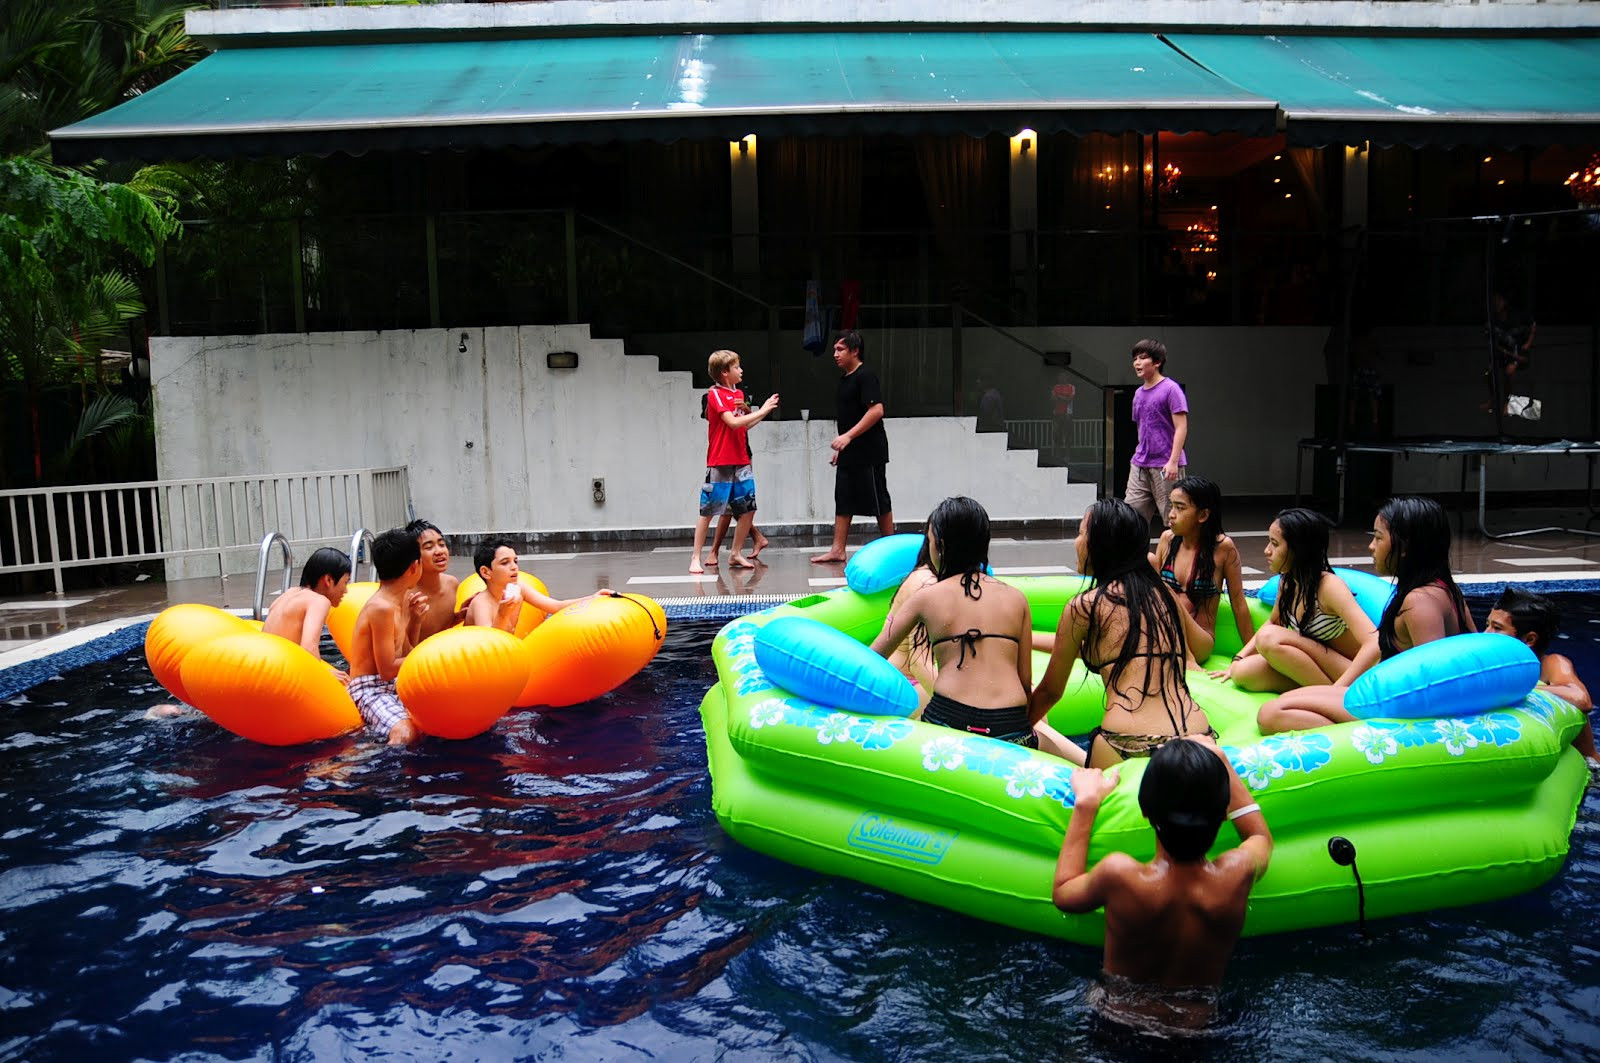 Pool Party Ideas For Teens
 Event DirecTus Pool Party FUN for KIDS TEENS & ADULTS